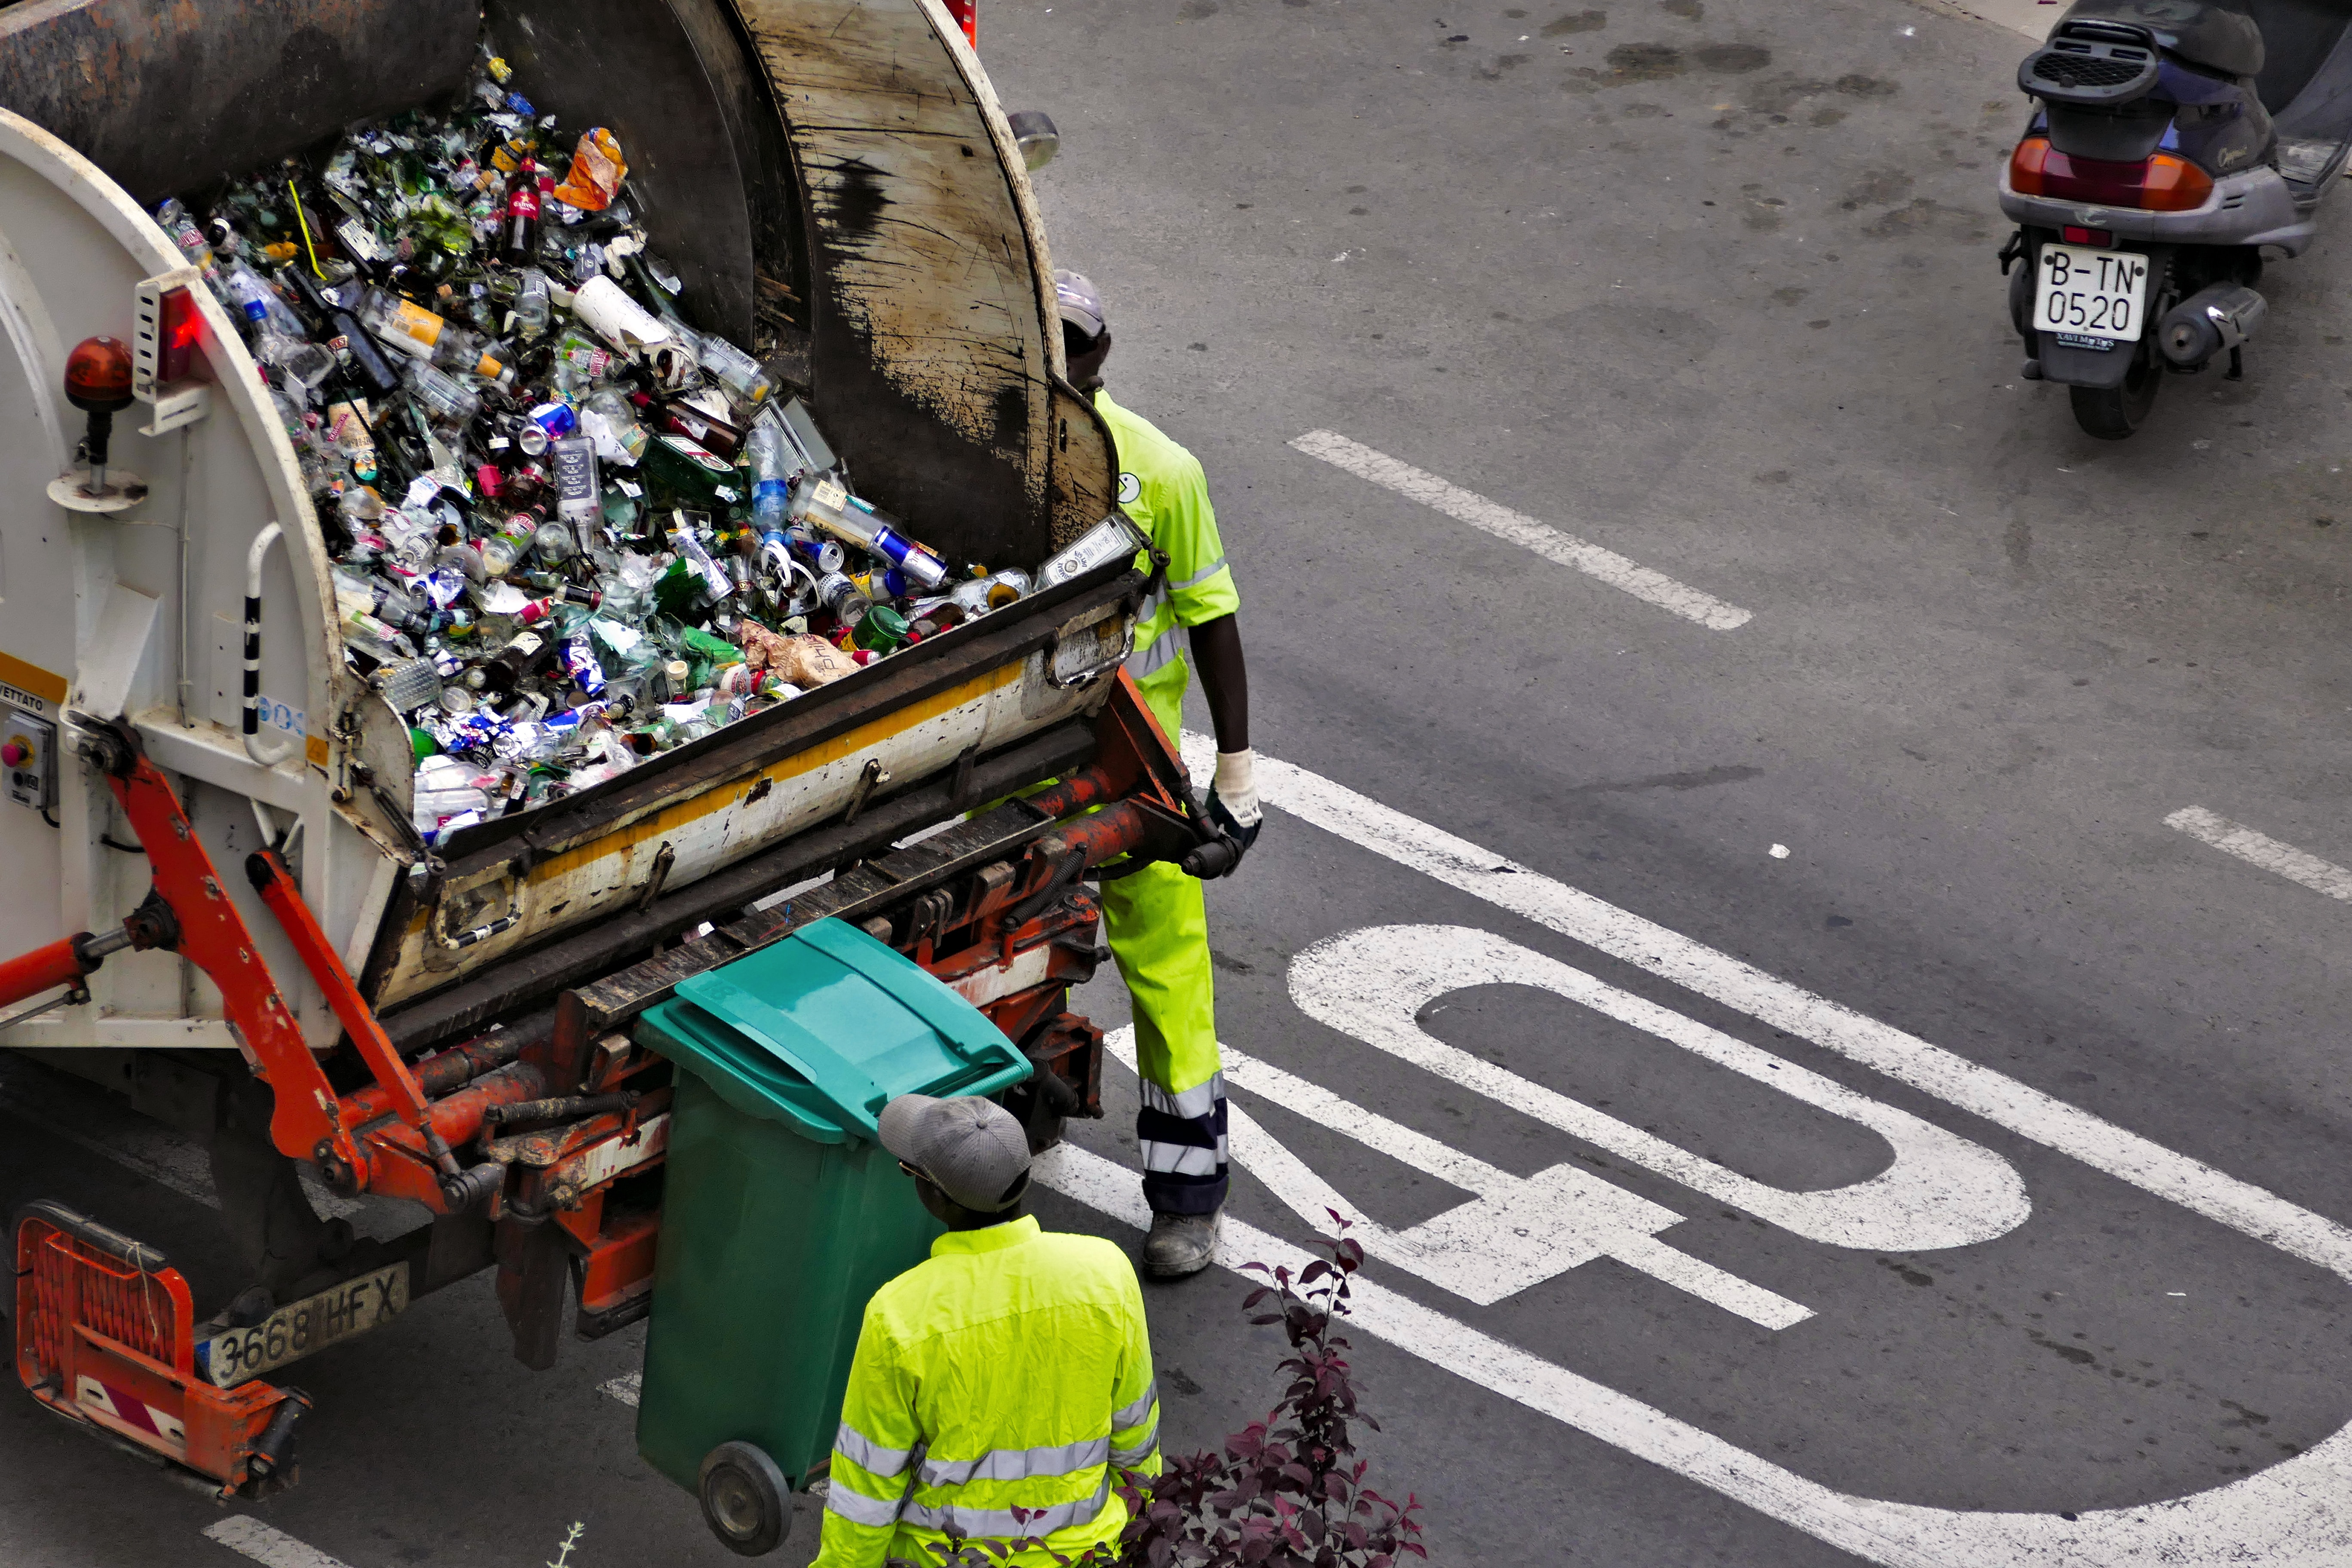 Waste being collected in a garbage truck.